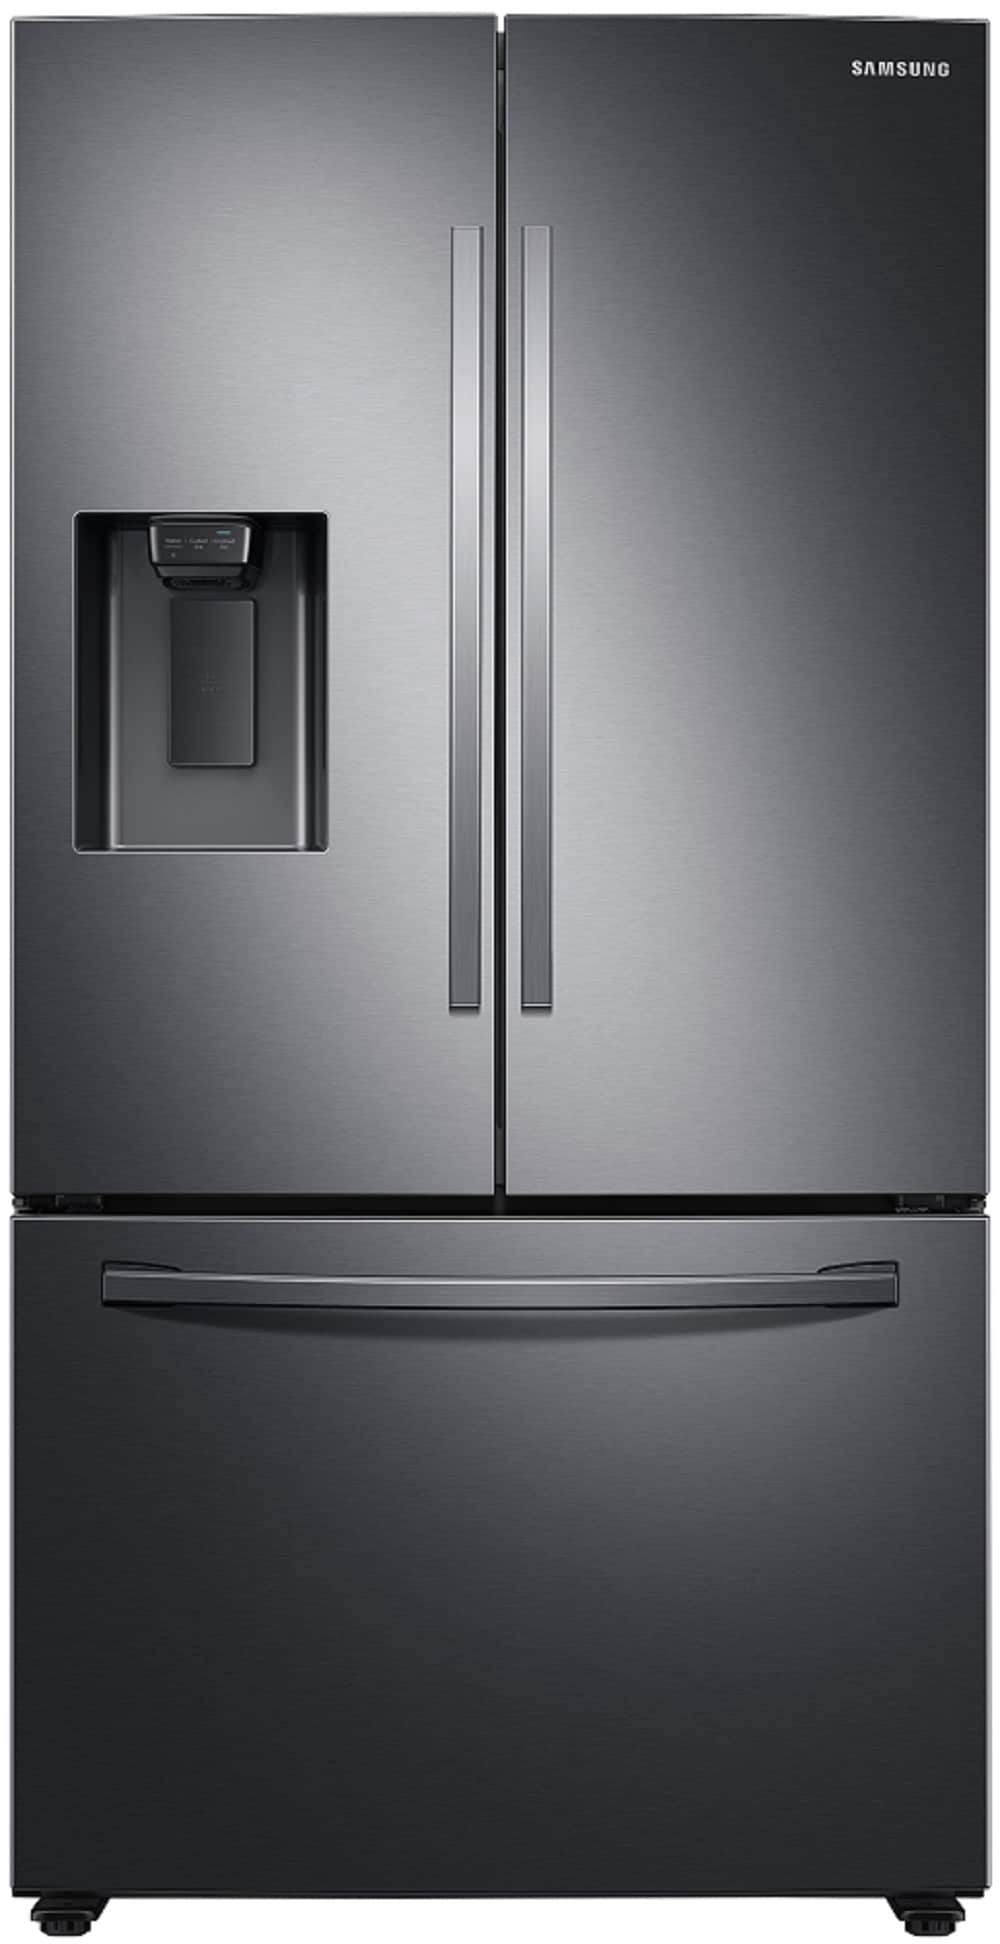 Black stainless steel Refrigerators at Lowes.com